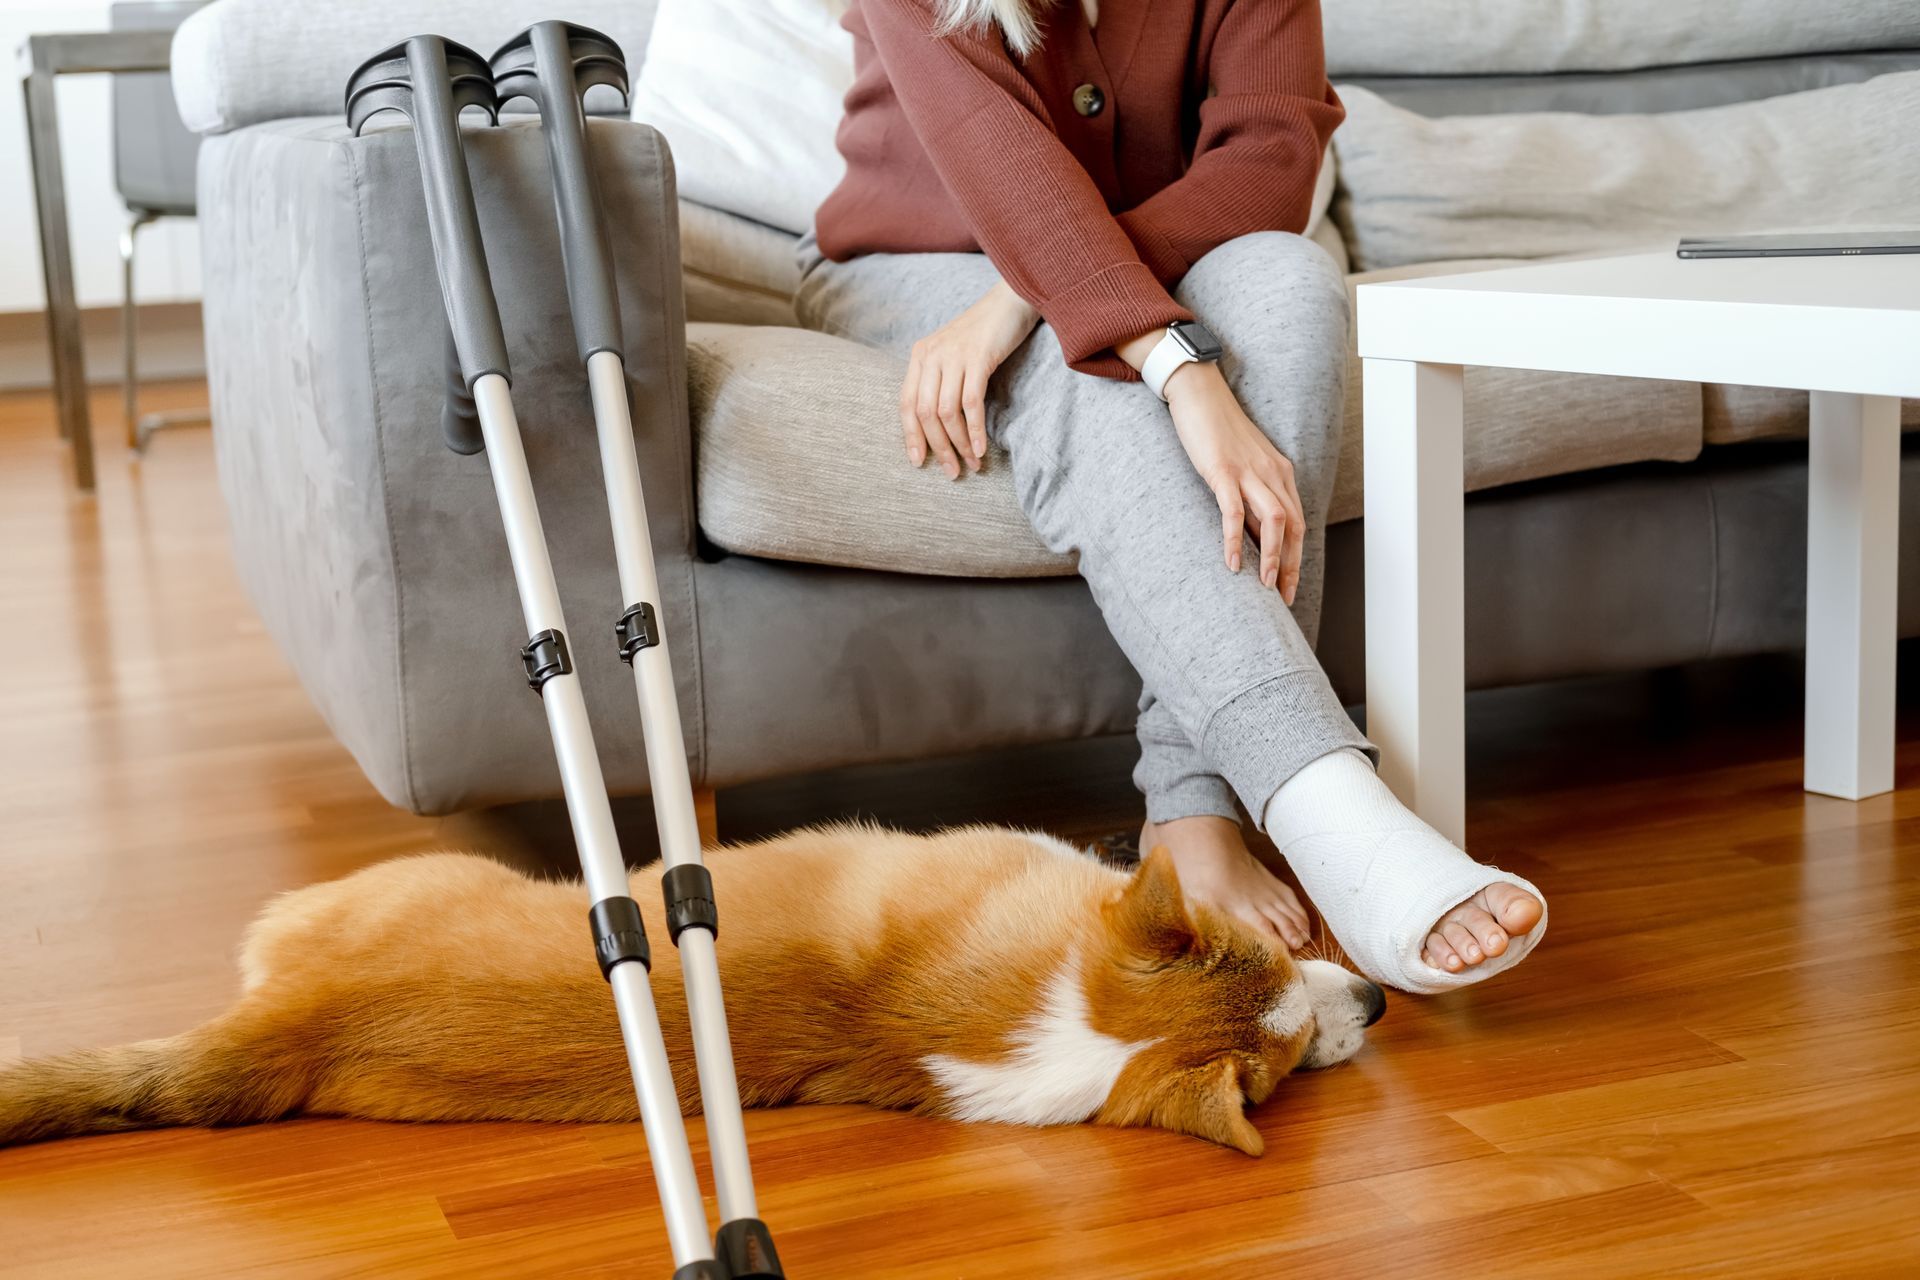 The same young woman sits, her face out of frame, with the corgy laying by her feet - they are both relaxed because they have employee disability insurance